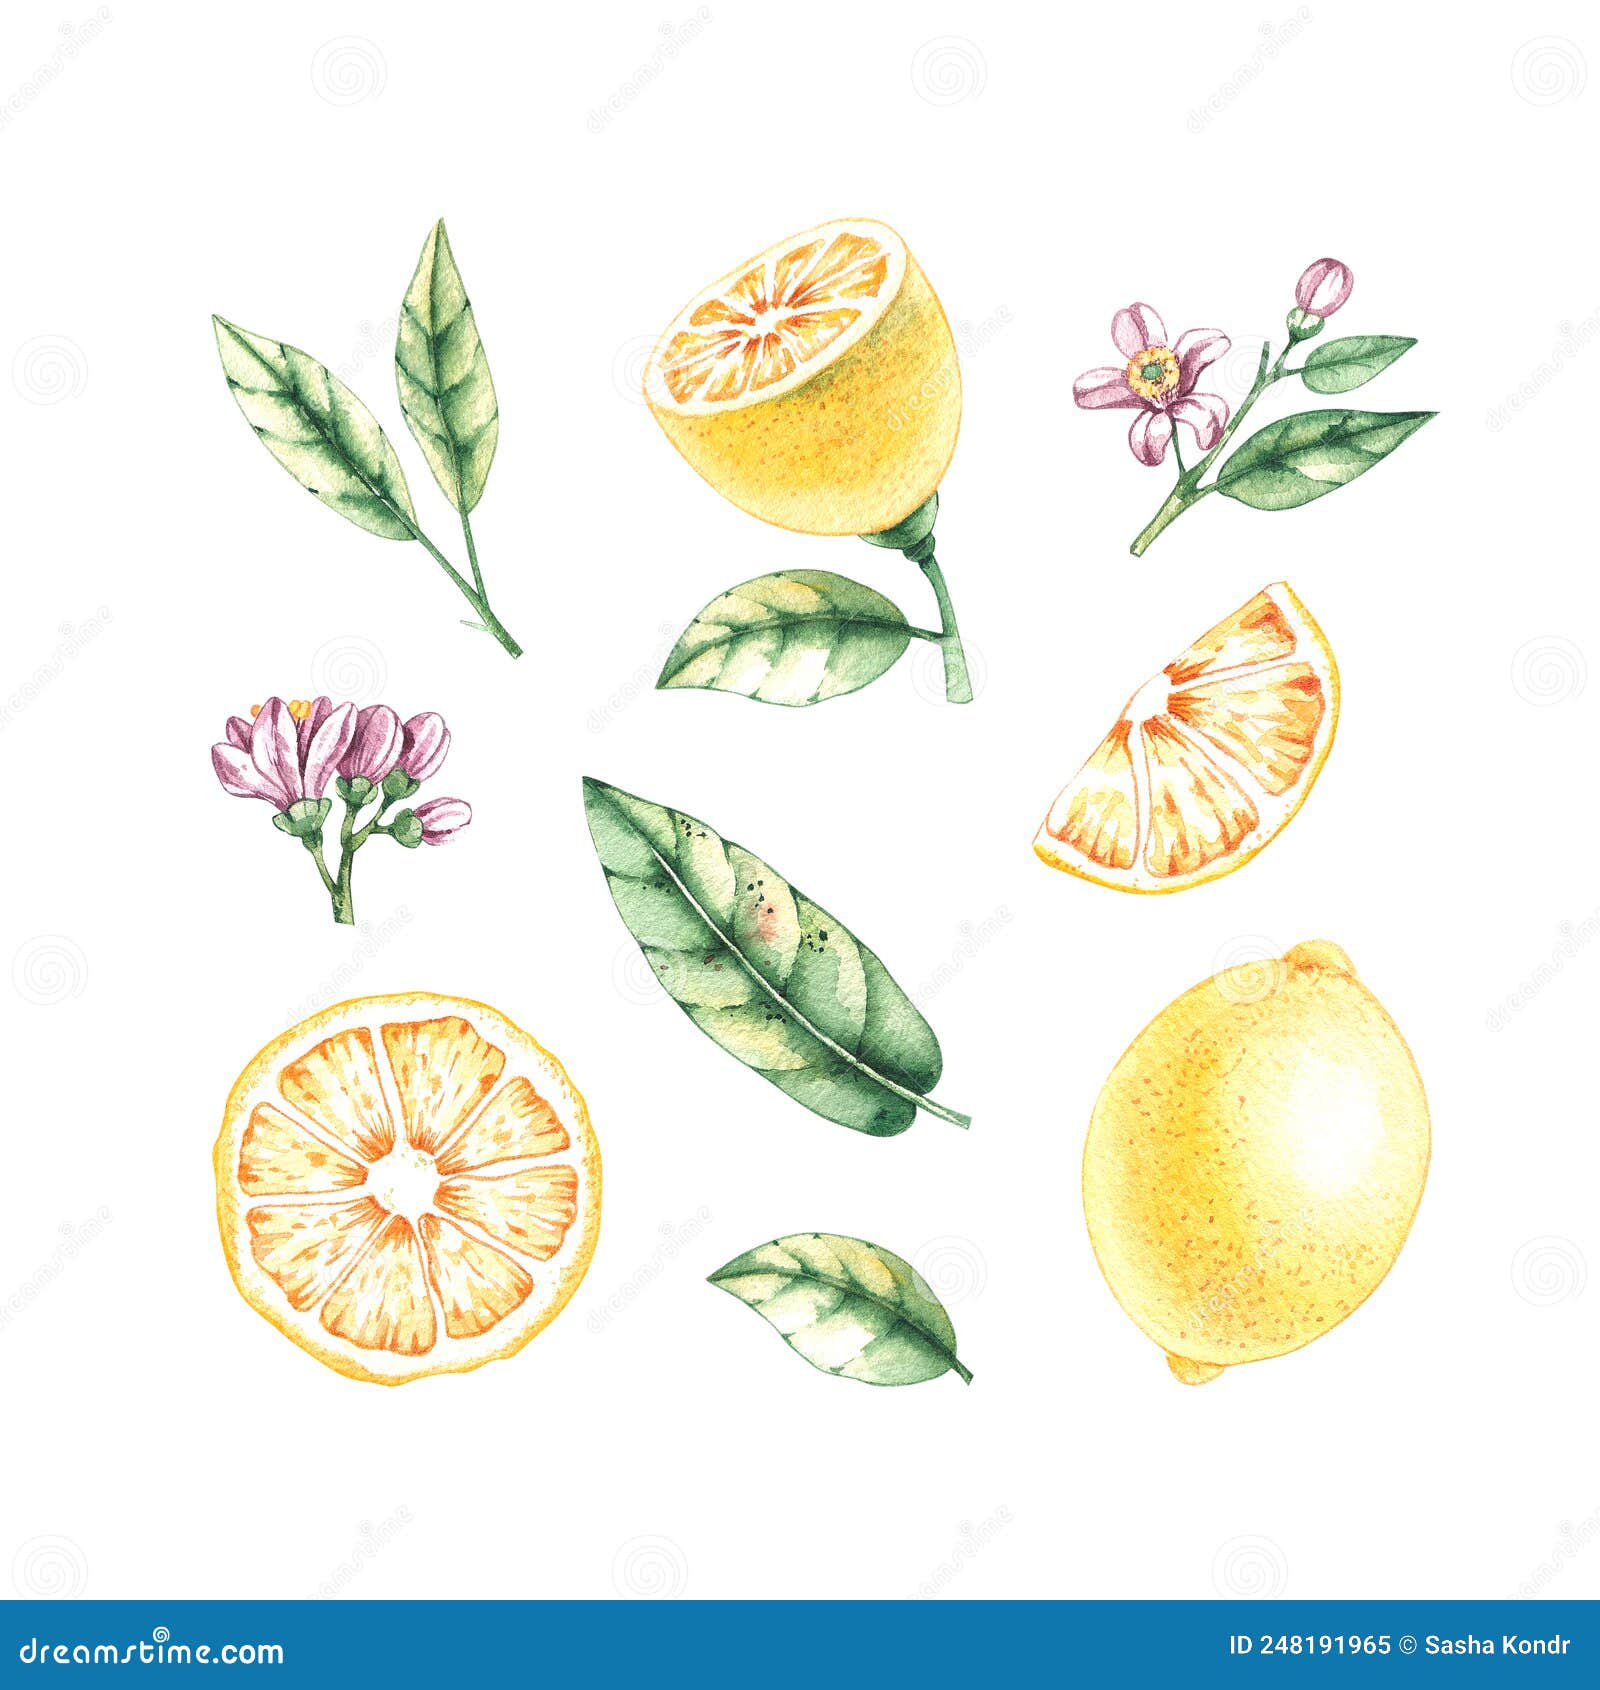 Watercolor Set with Lemons, Leaves and Flowers Stock Image - Image of ...